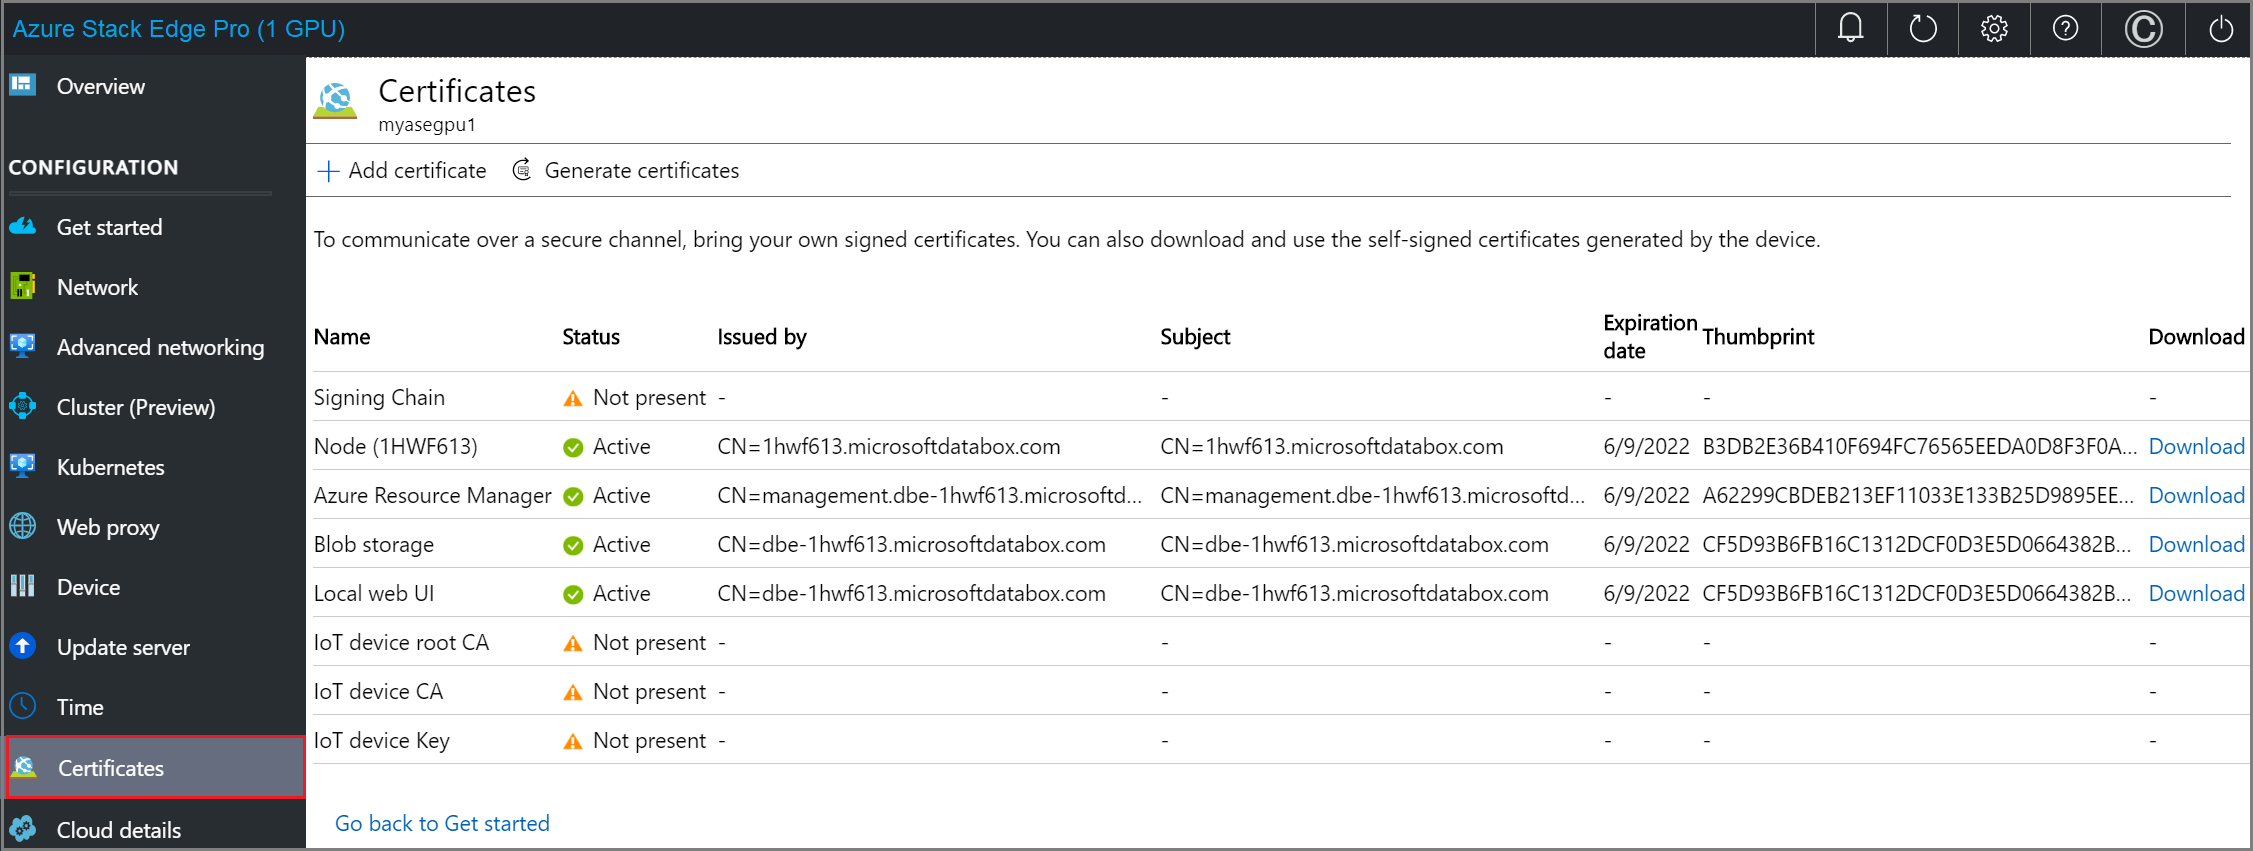 Screenshot of the Certificates page in the local web UI of Azure Stack Edge. The Certificates menu item is highlighted.